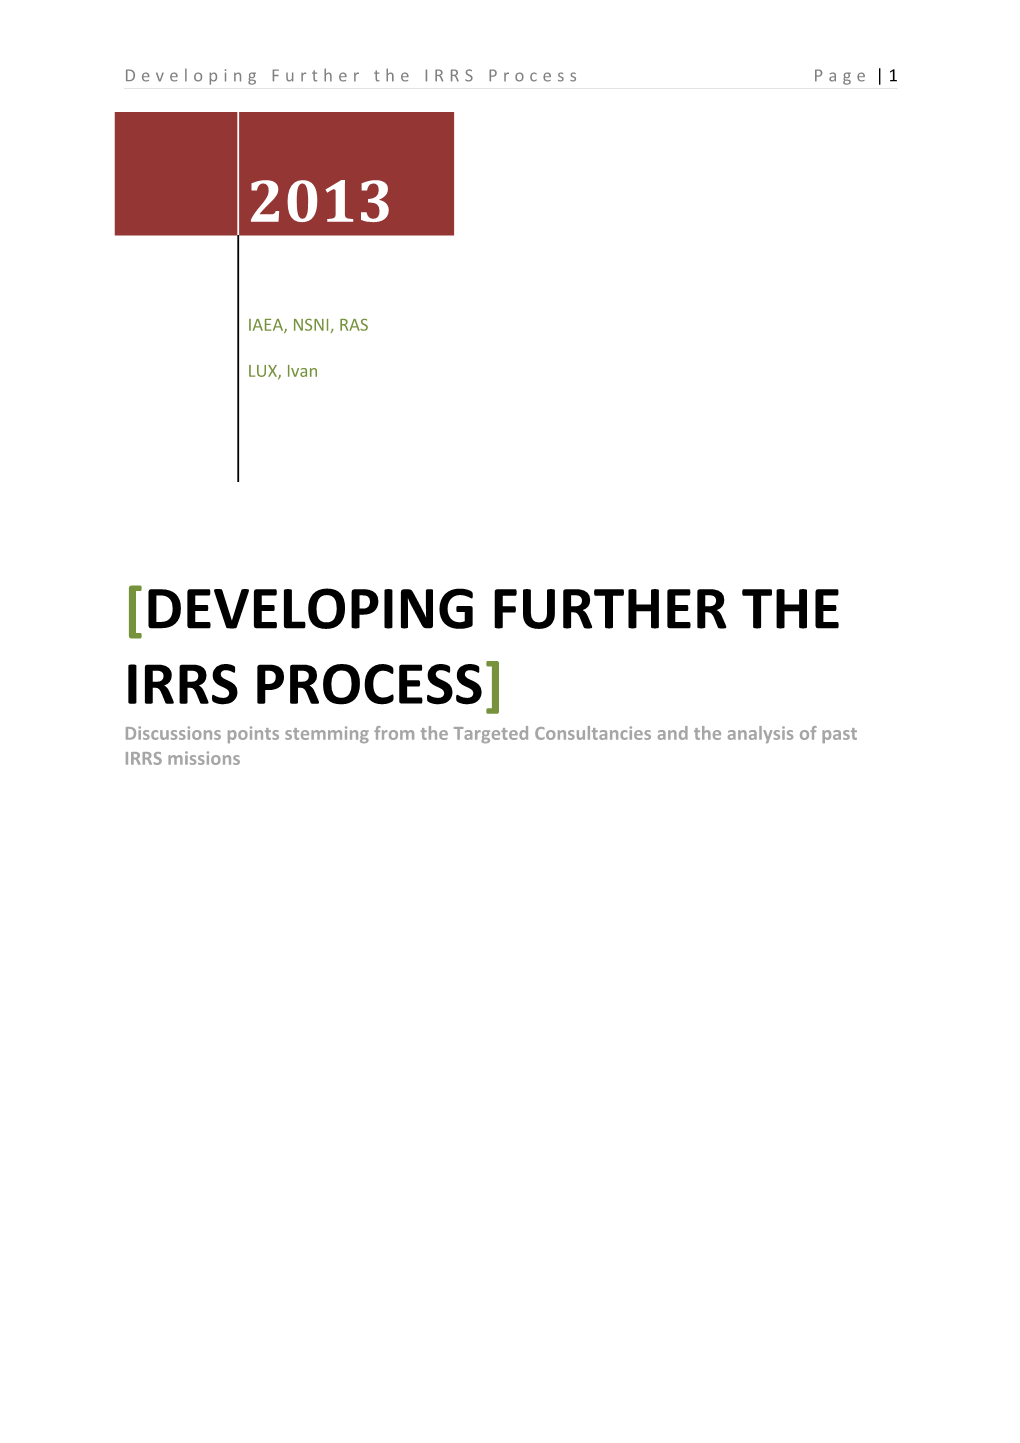 Developing Further the Irrs Process